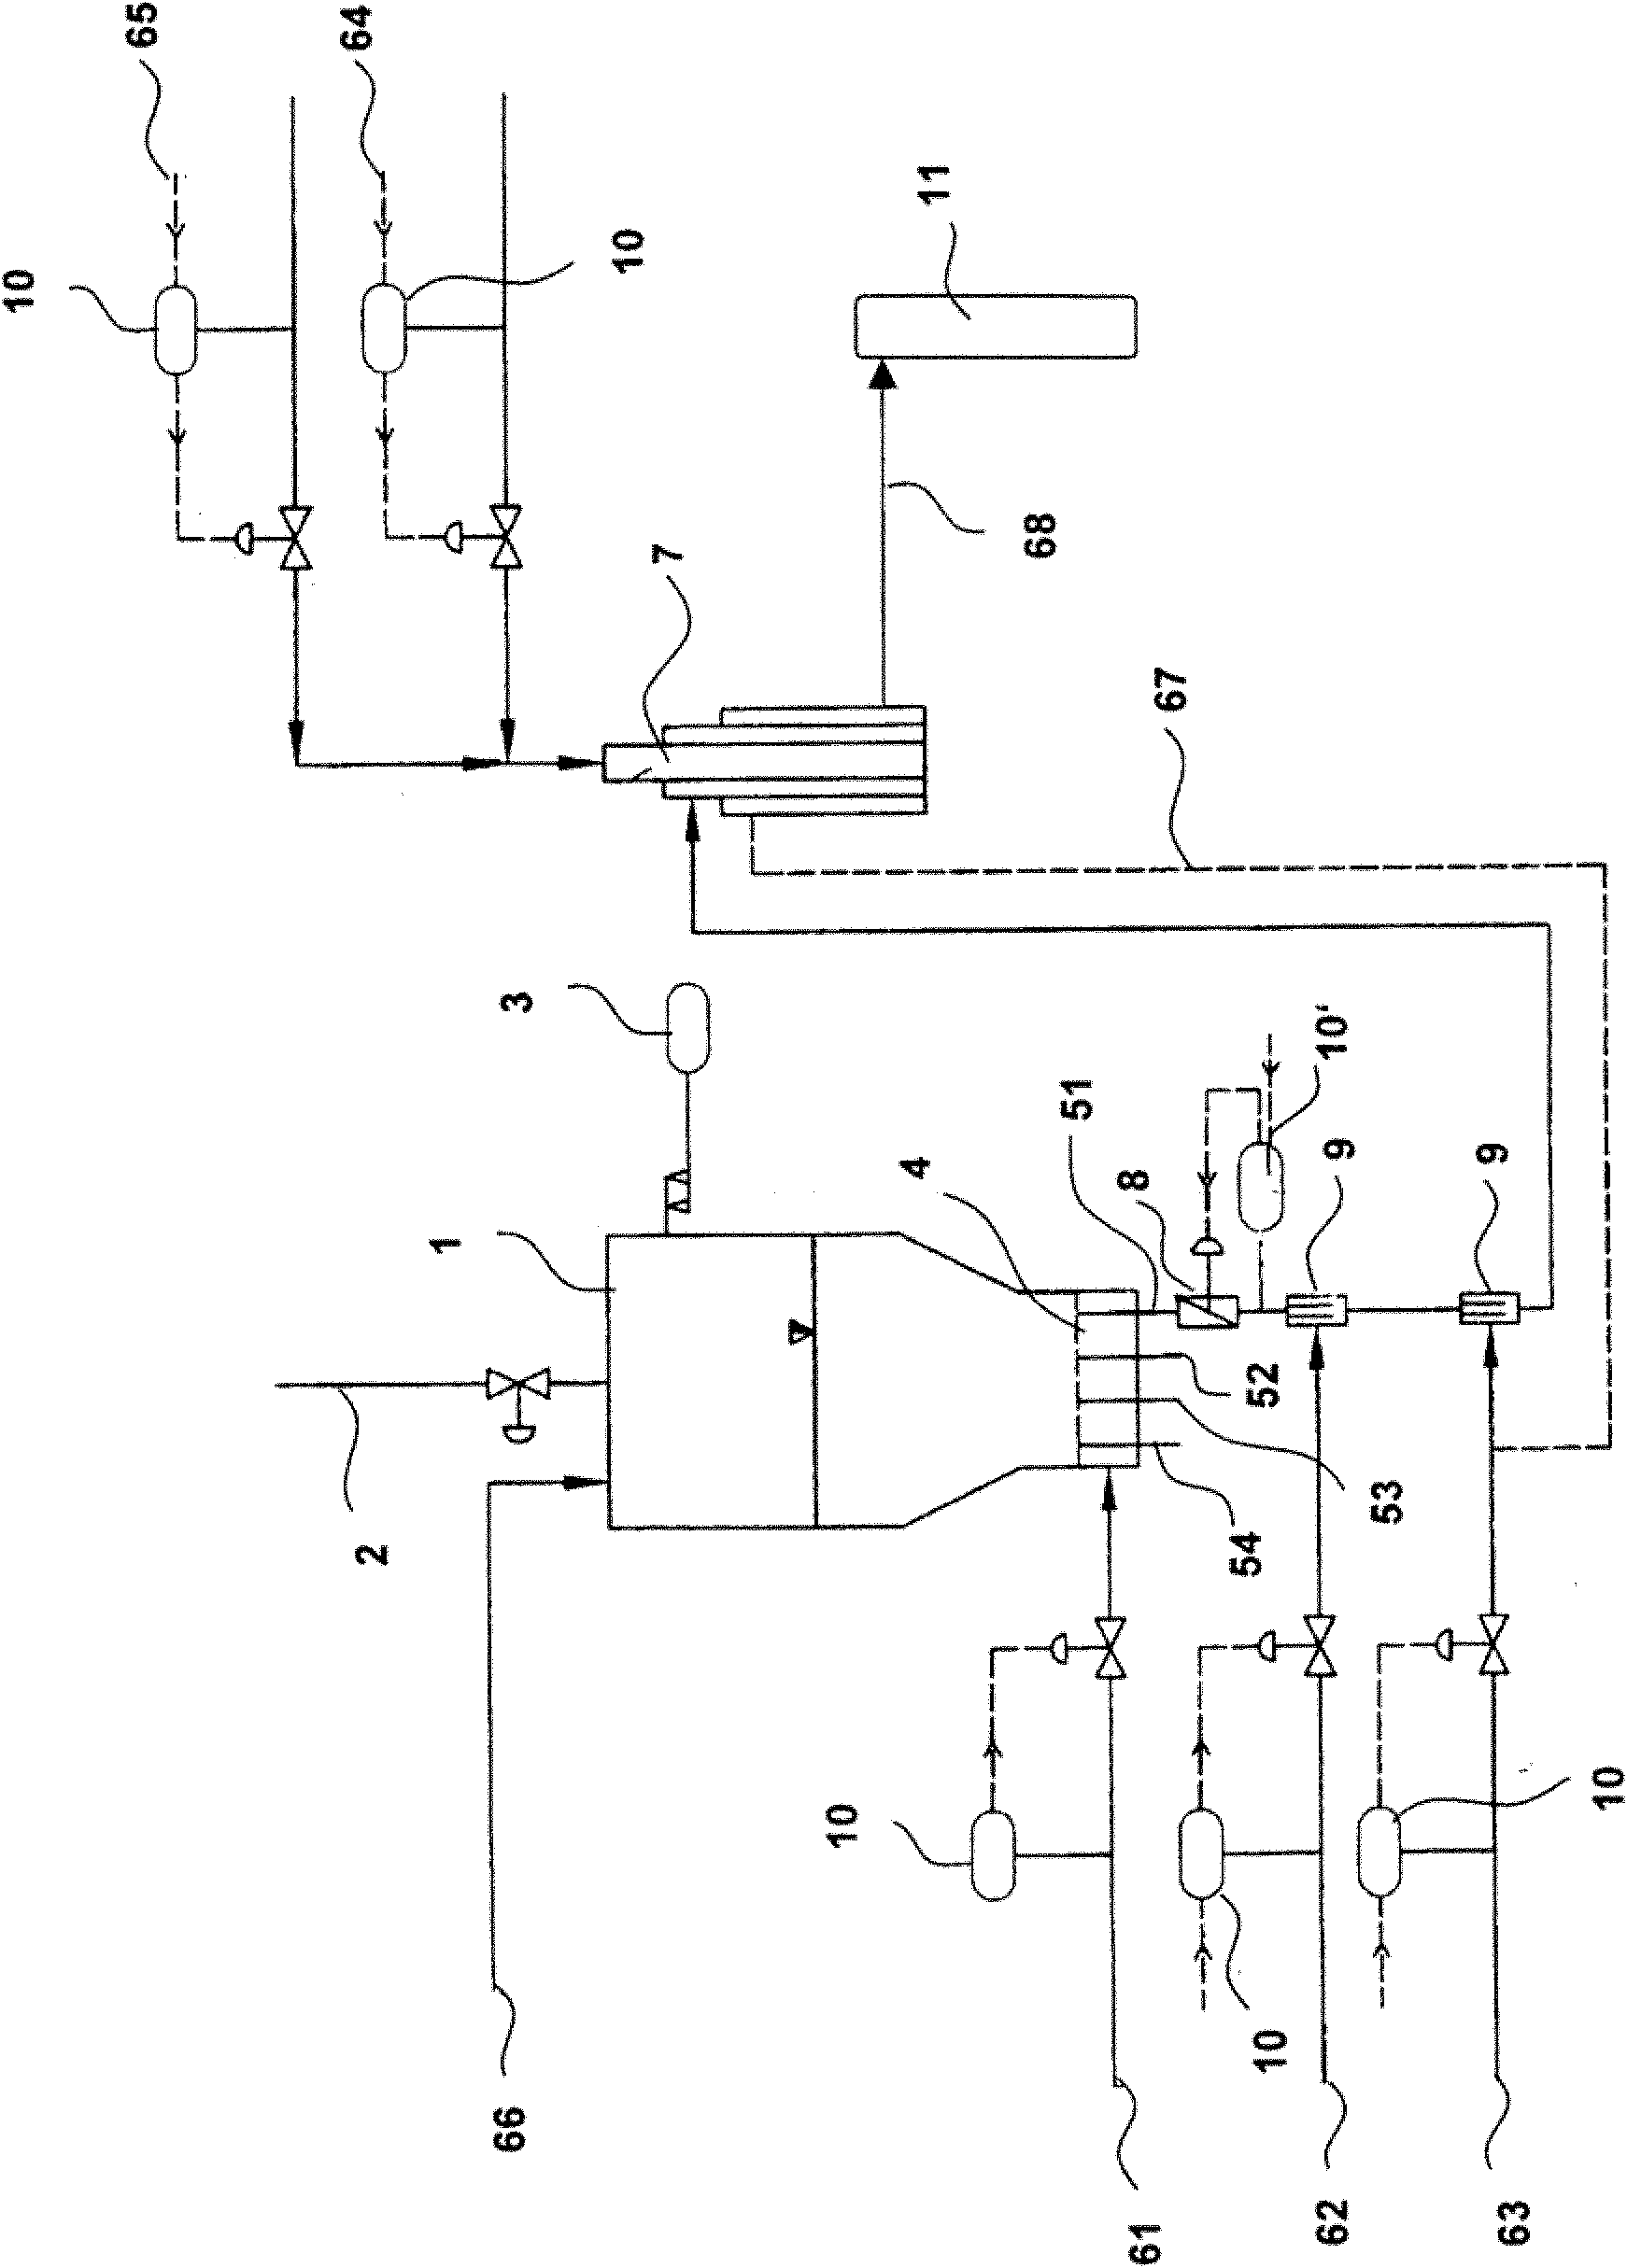 Method and apparatus for starting up gasifying reactors operated with combustible dust